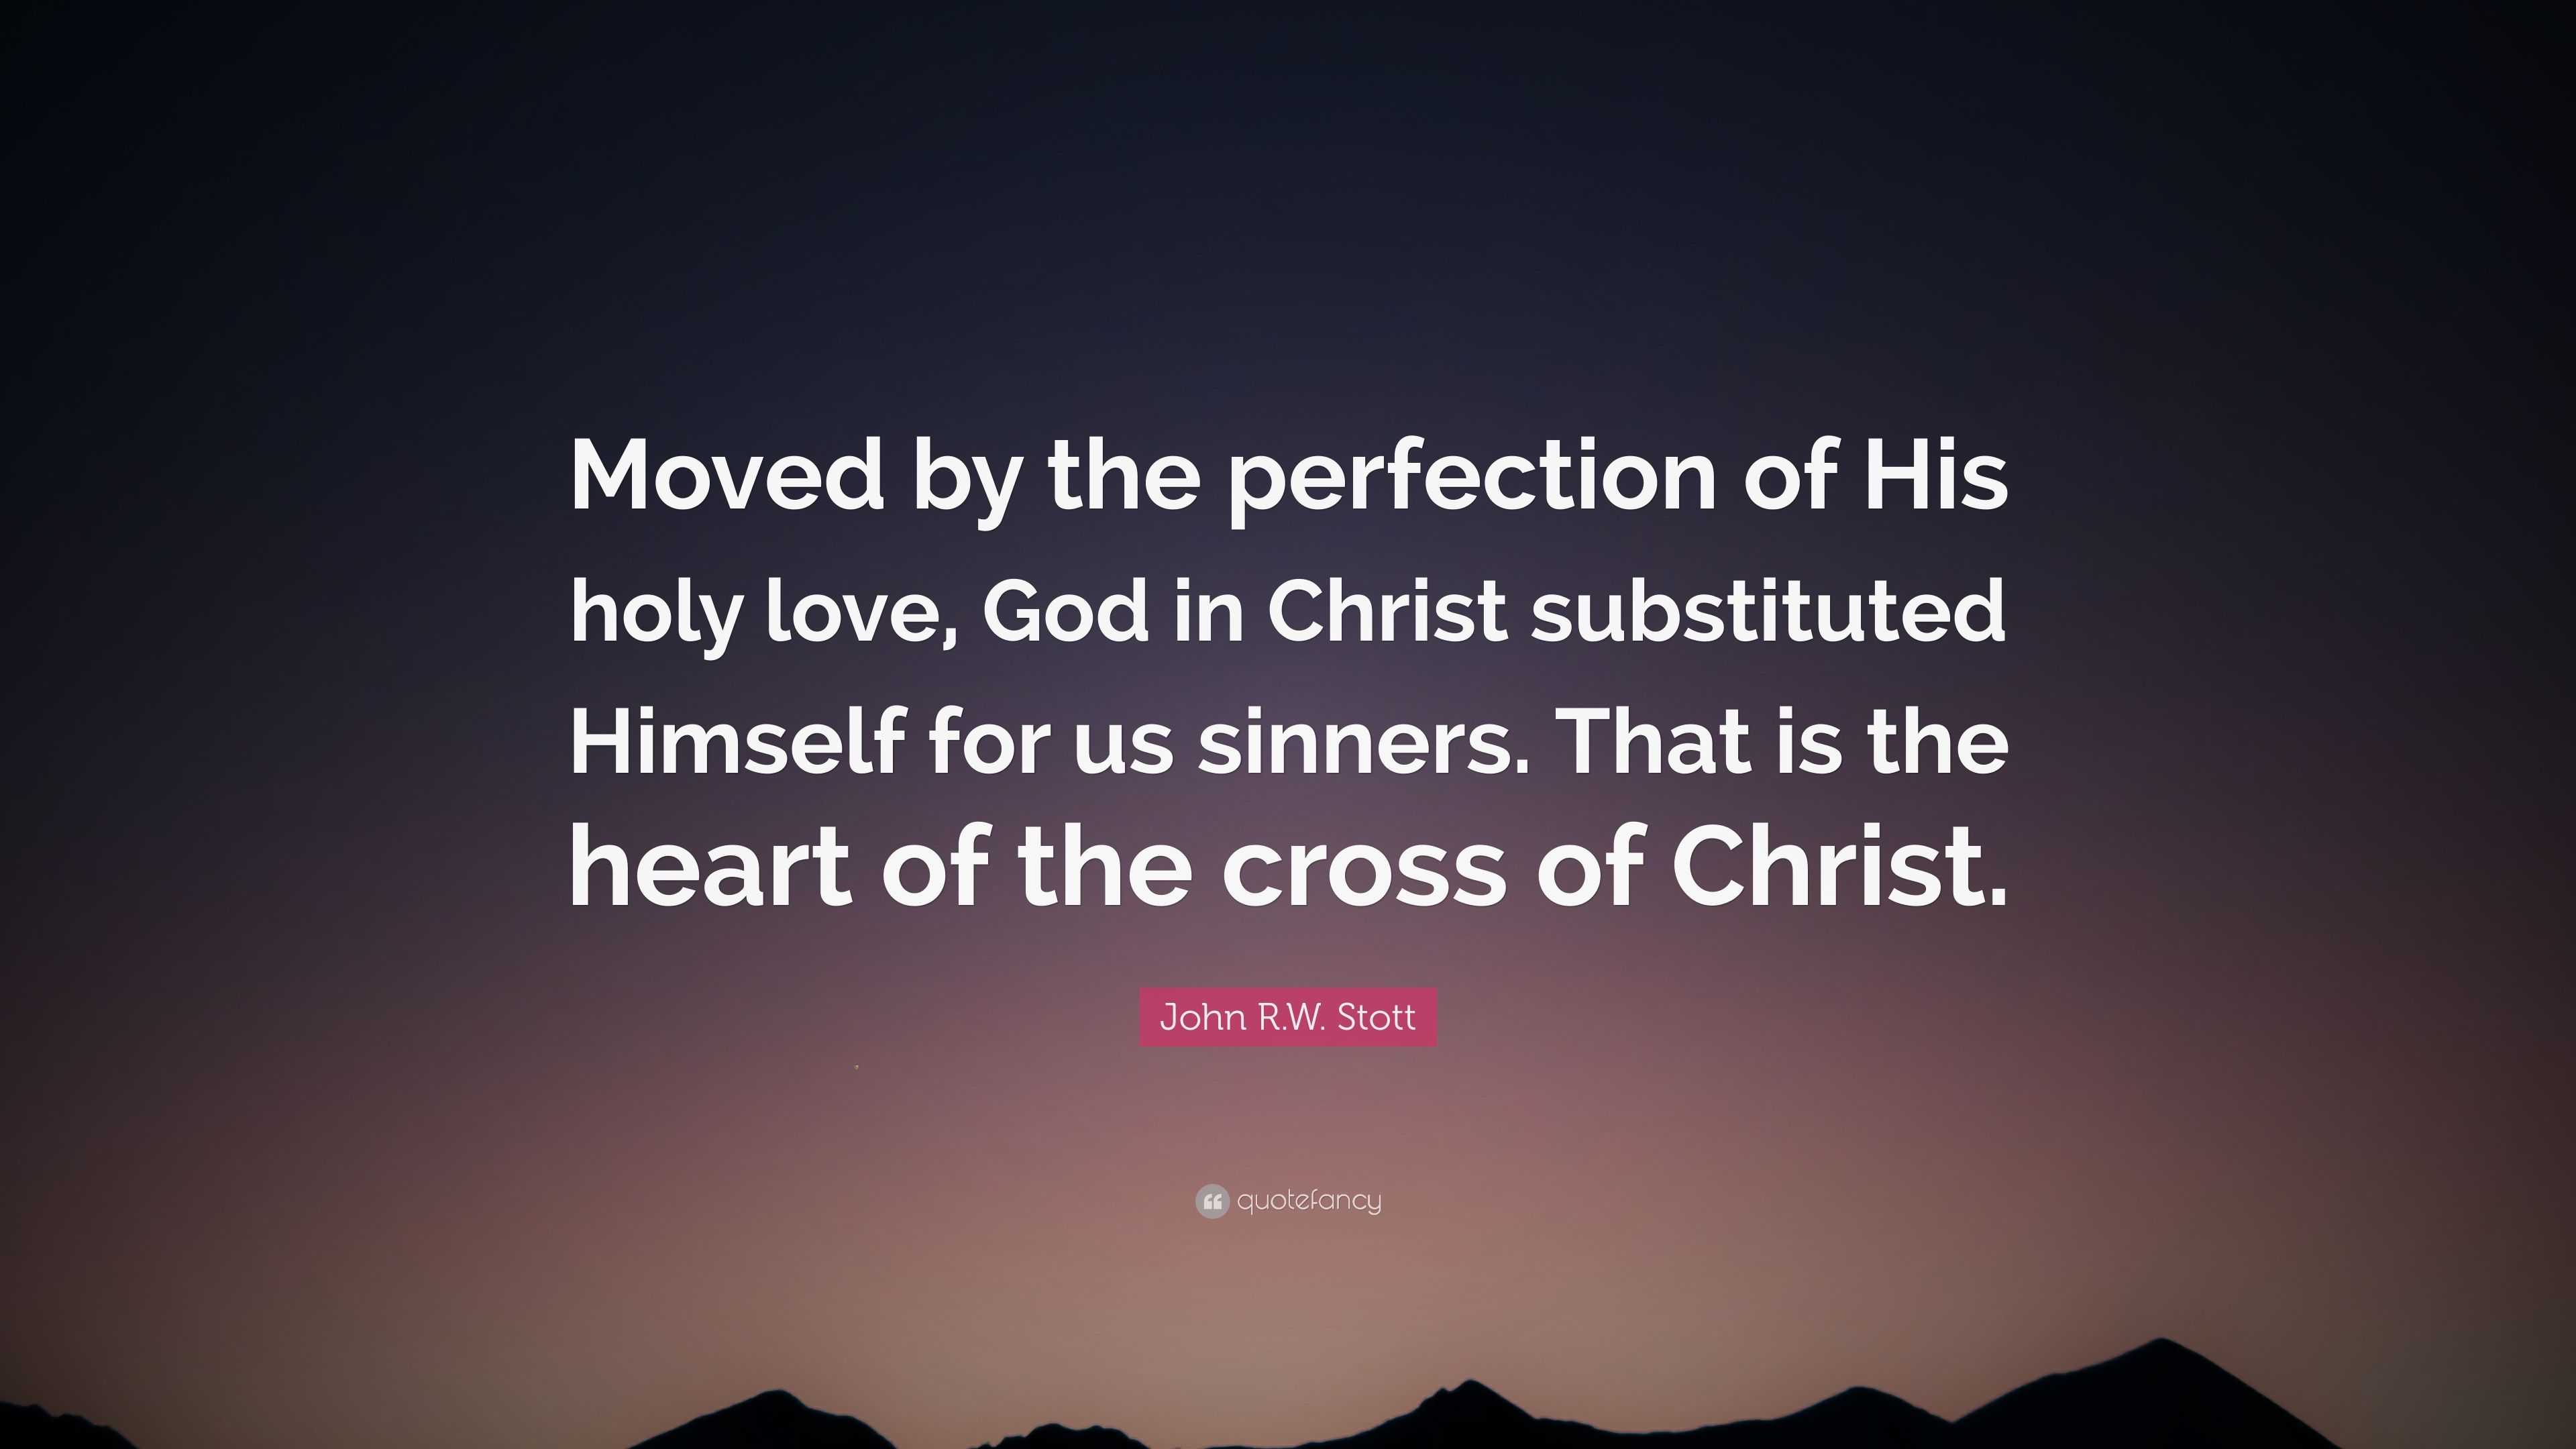 John R W Stott Quote “Moved by the perfection of His holy love God